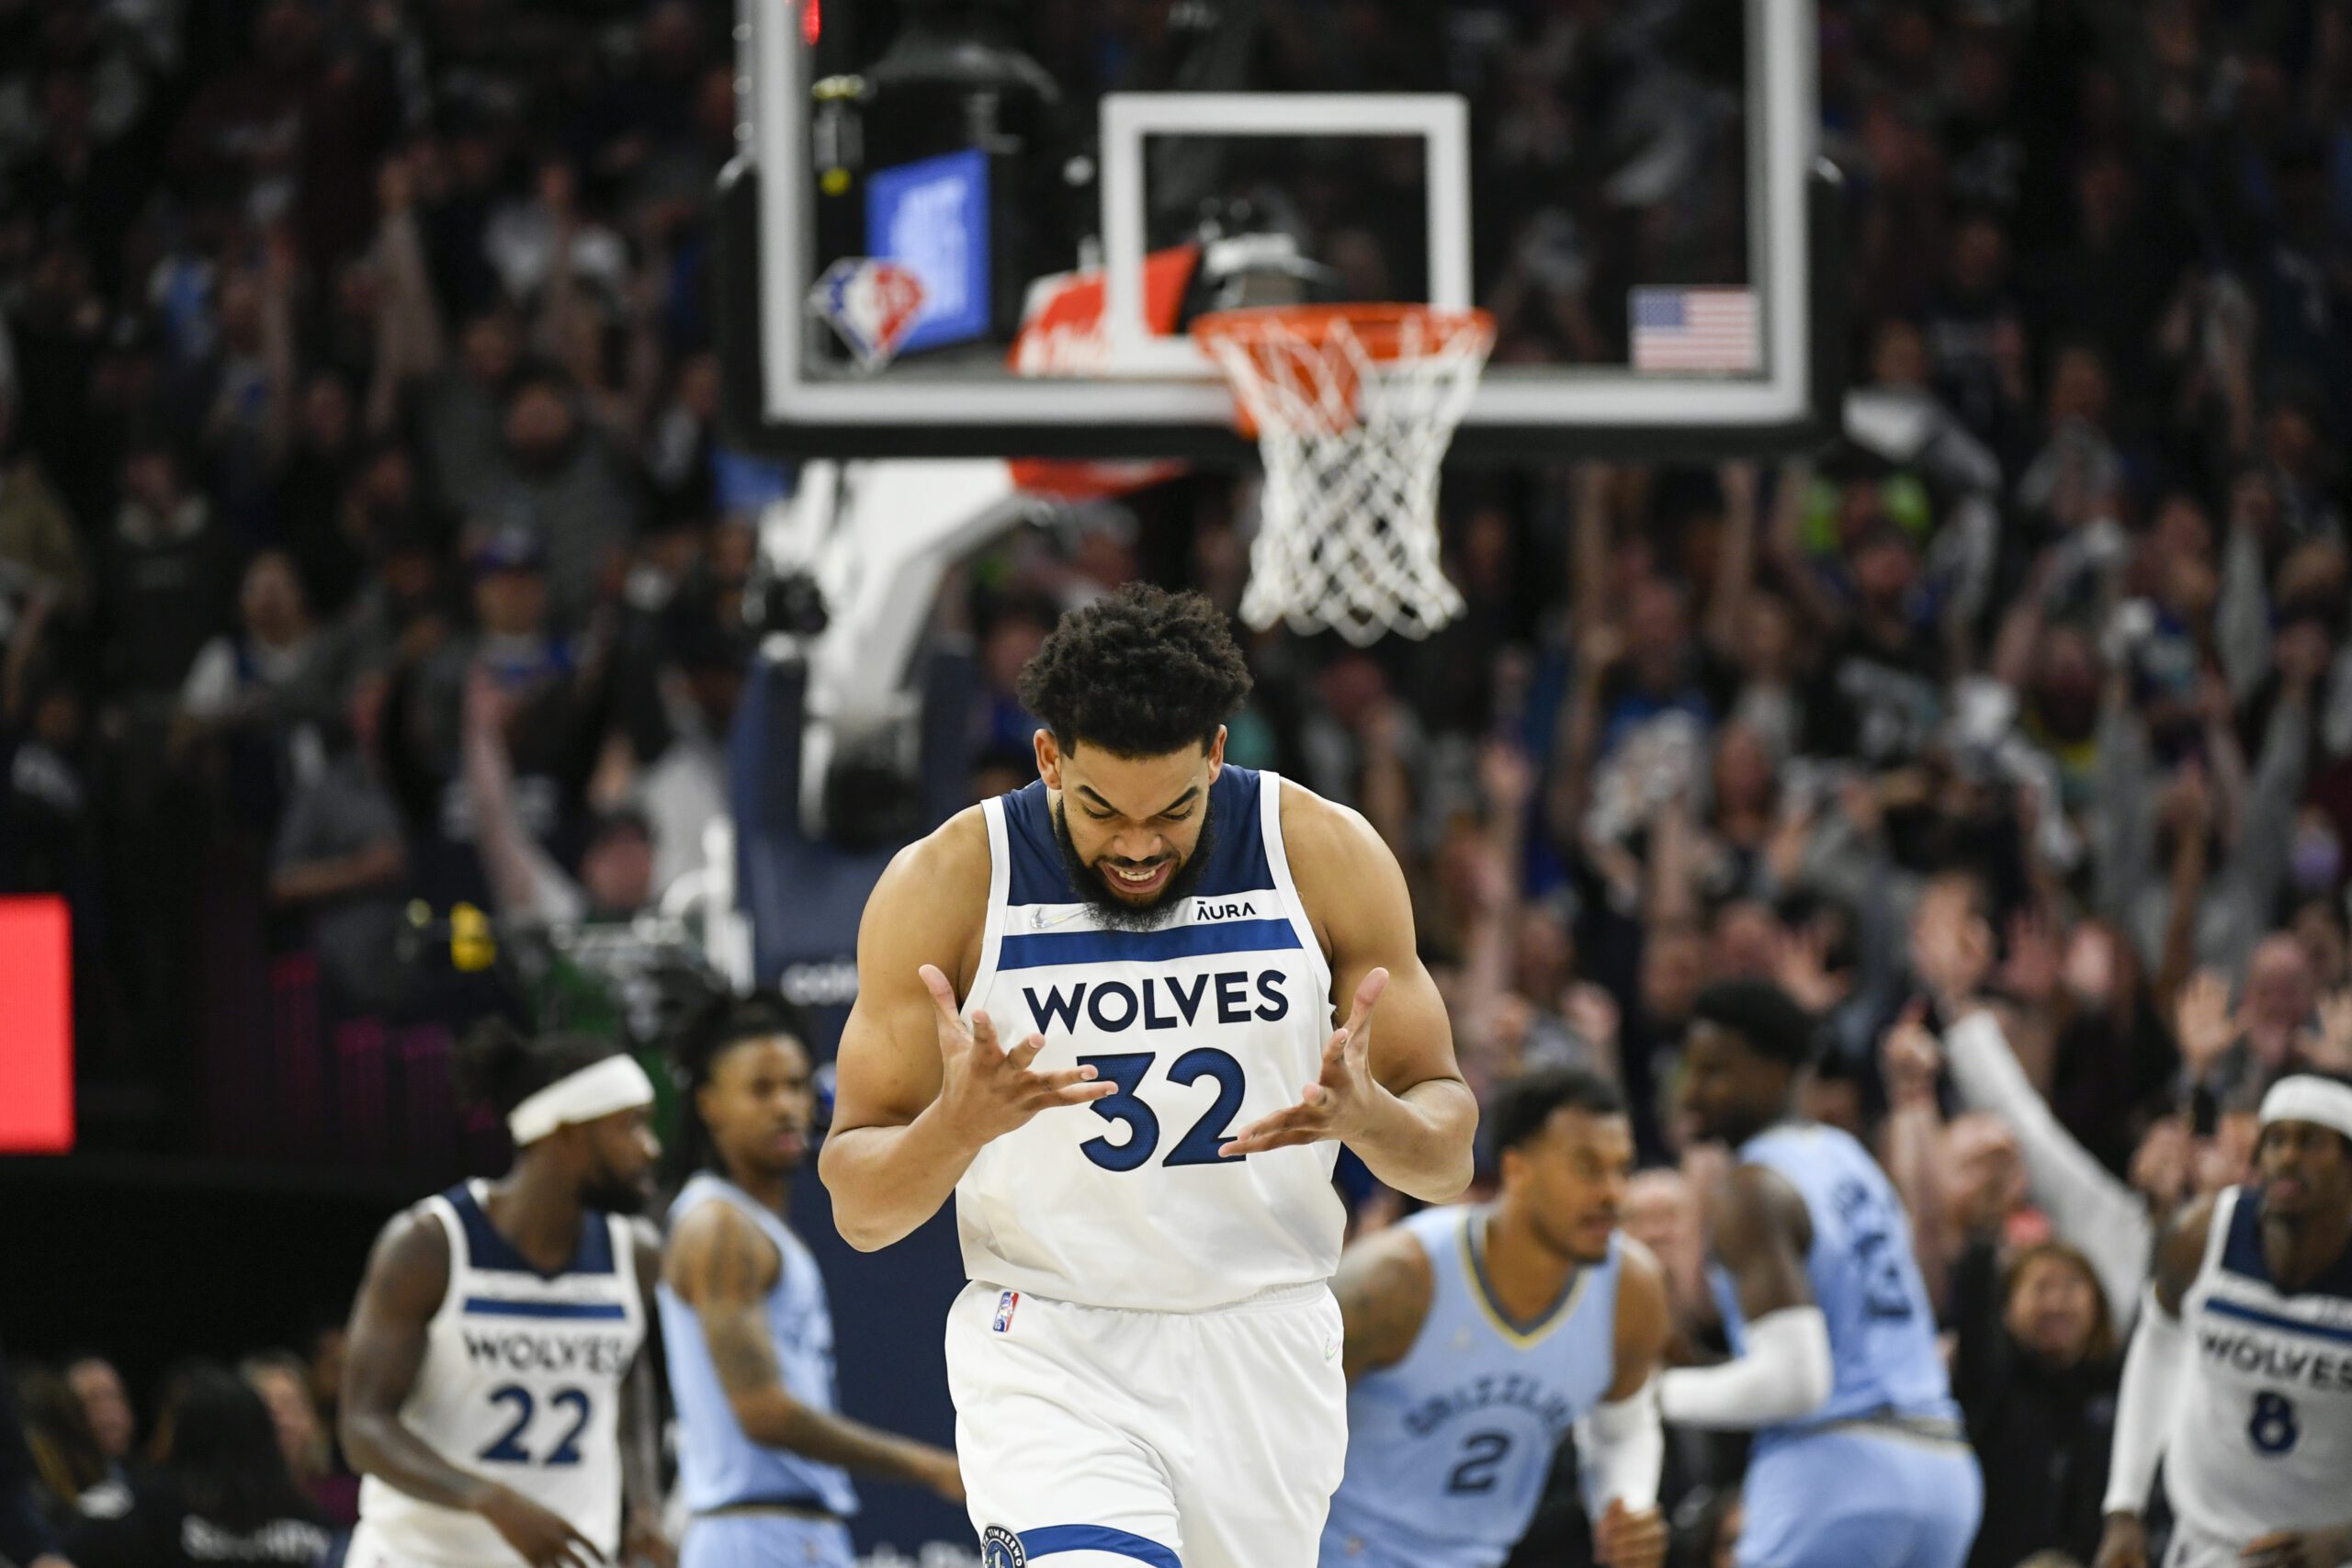 Edwards, Towns lead Timberwolves past Pistons, 128-117